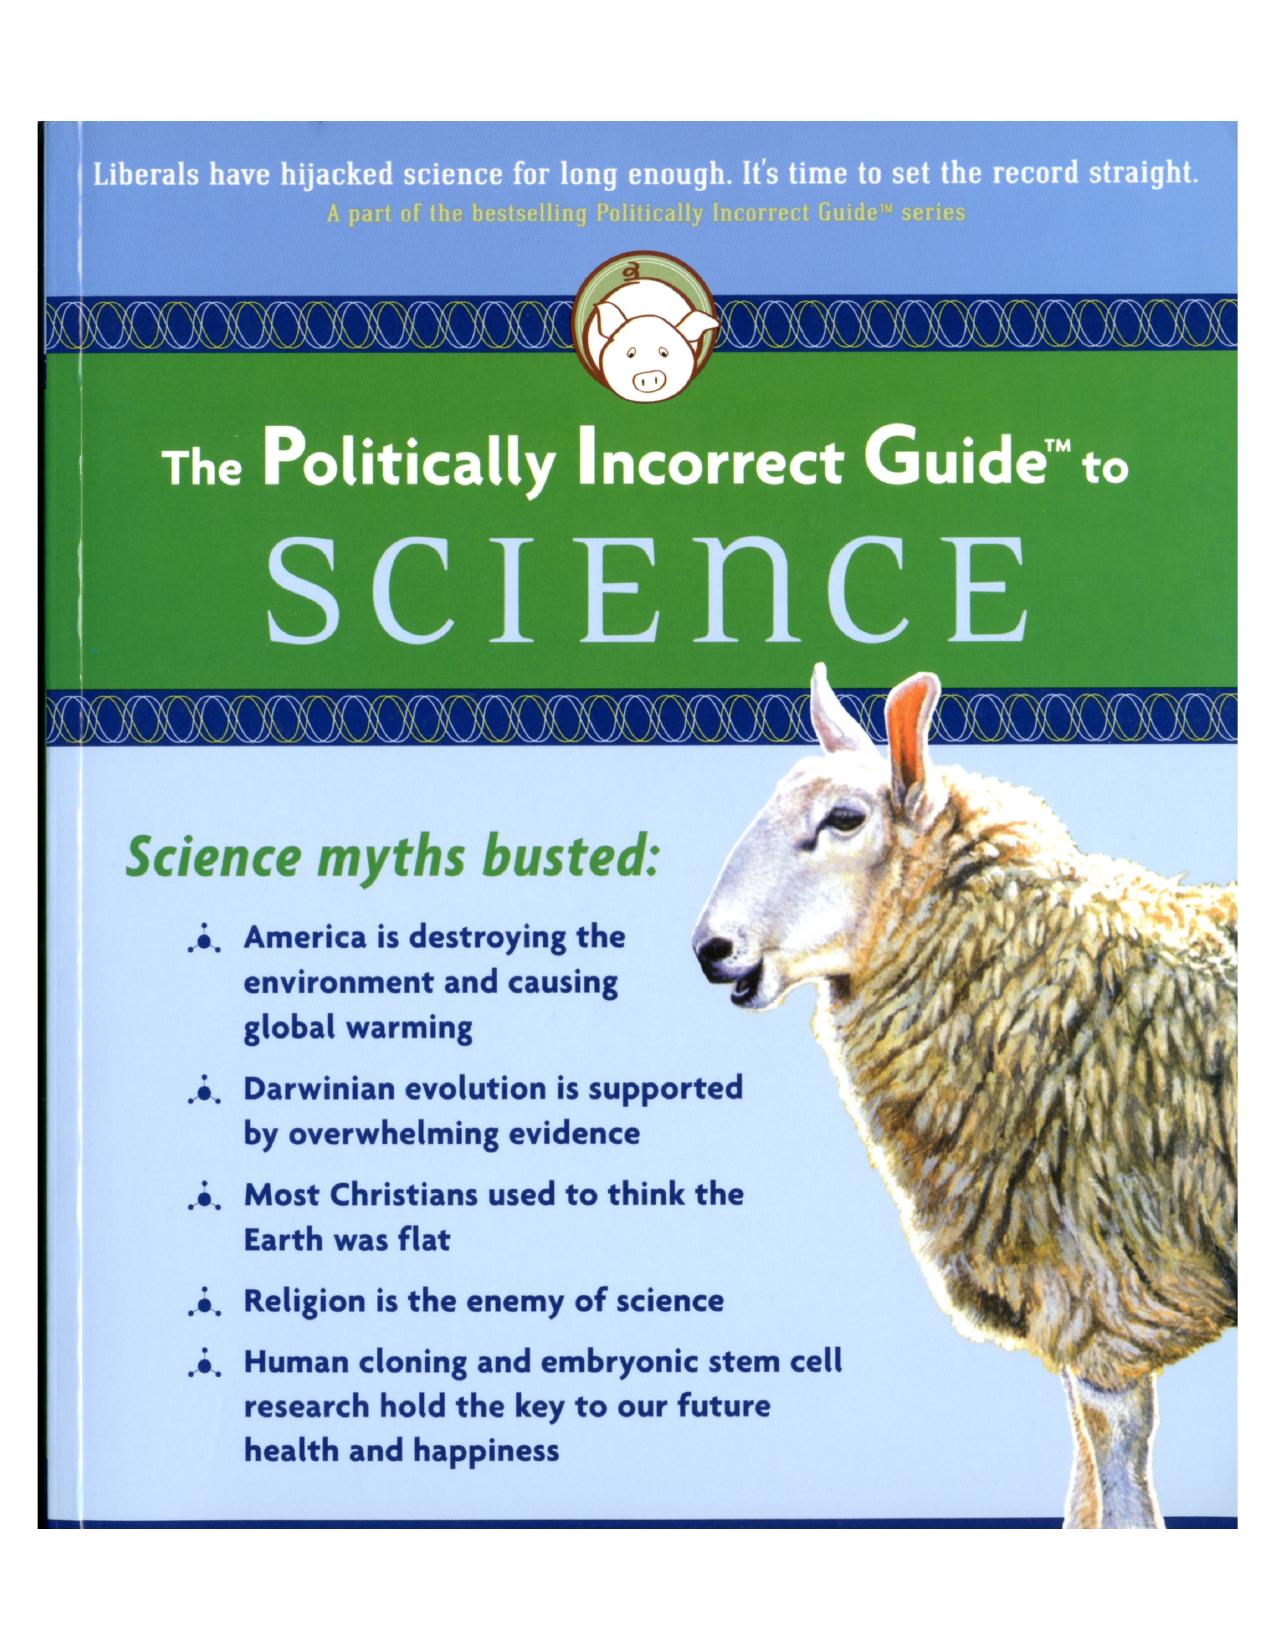 The Politically Incorrect Guide To Science-Tom Bethel (2005) by Unknown